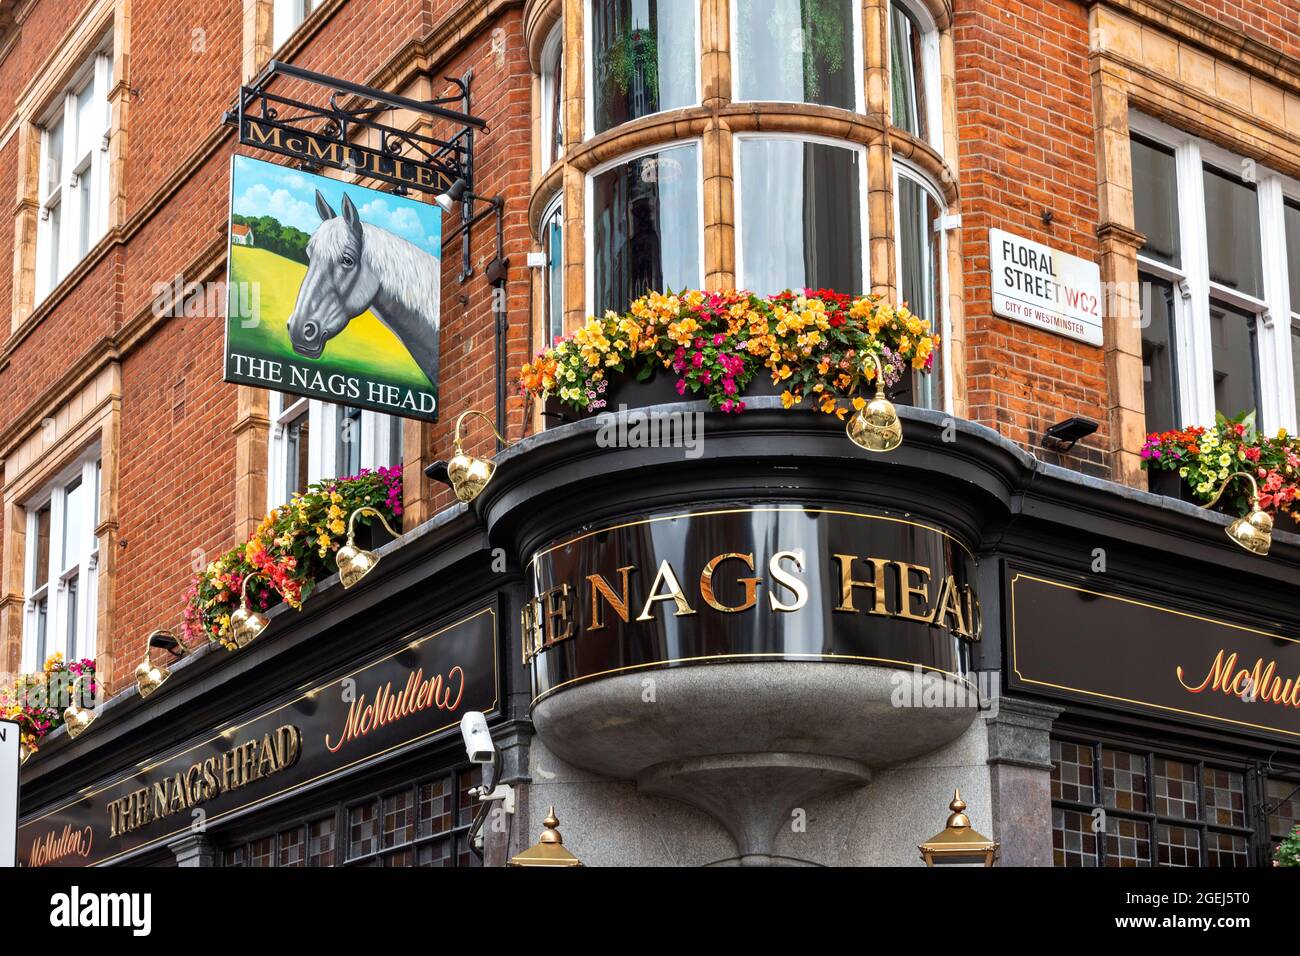 LONDON COVENT GARDEN FLOWERS ON THE NAGS HEAD PUB FLORAL STREET Stock Photo